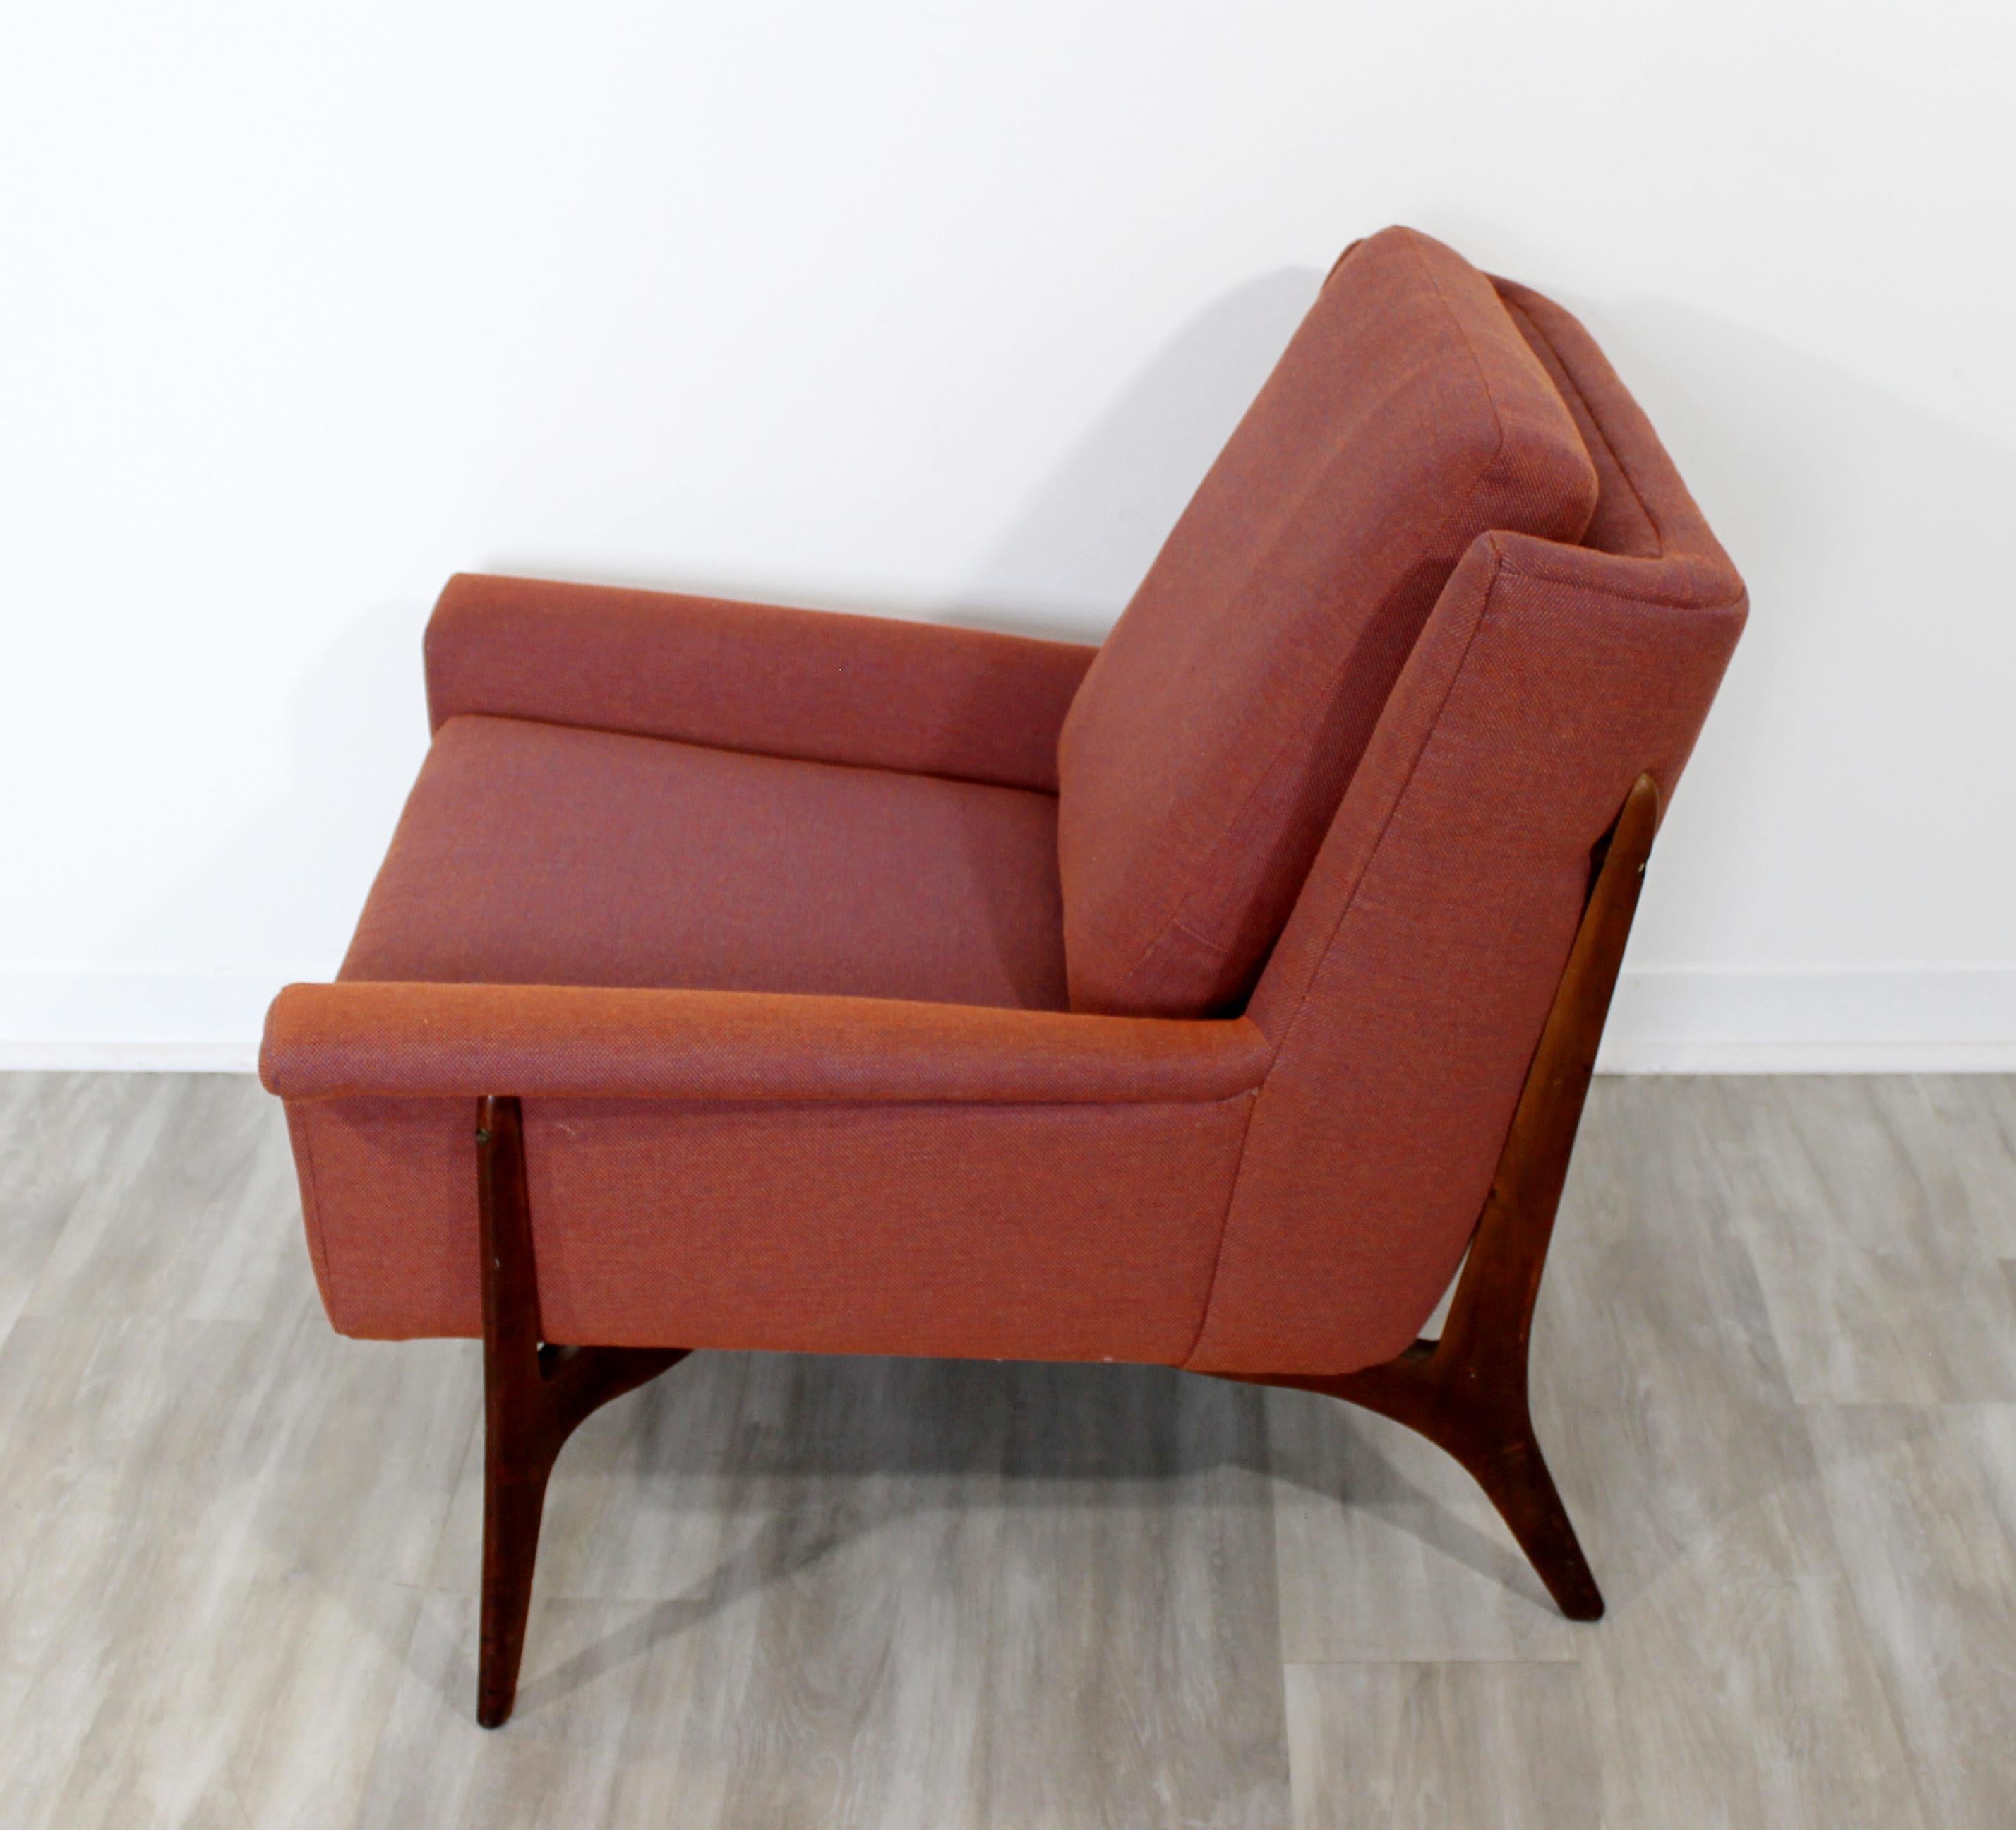 Mid-20th Century Mid-Century Modern Early Sculptural Wood Lounge Armchair, 1950s